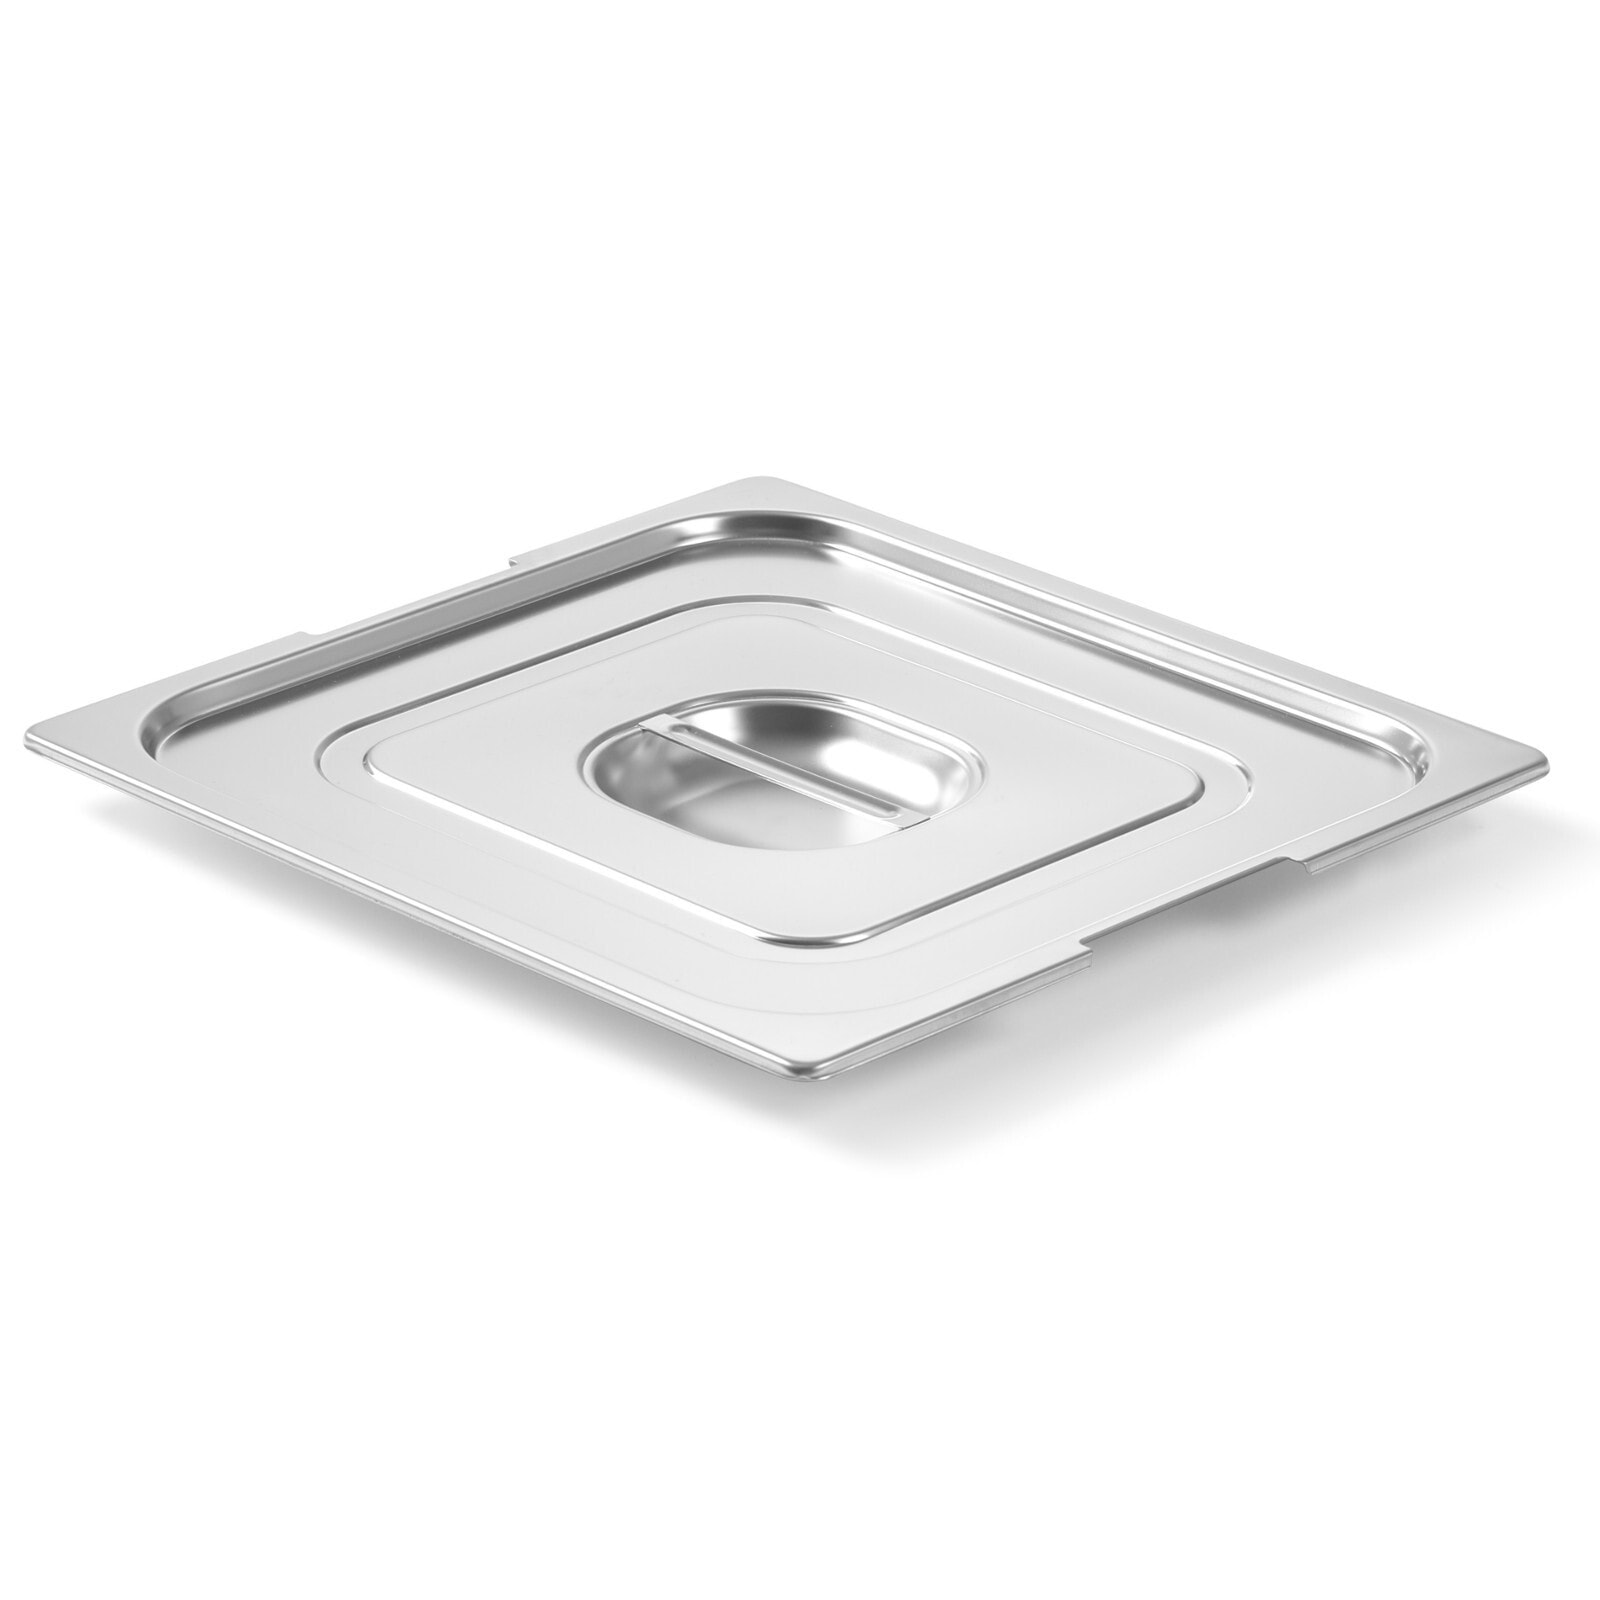 The lid for the GN container Profi Line with a cutout for the handles GN1 / 6 176x162mm stainless steel - Hendi 804254